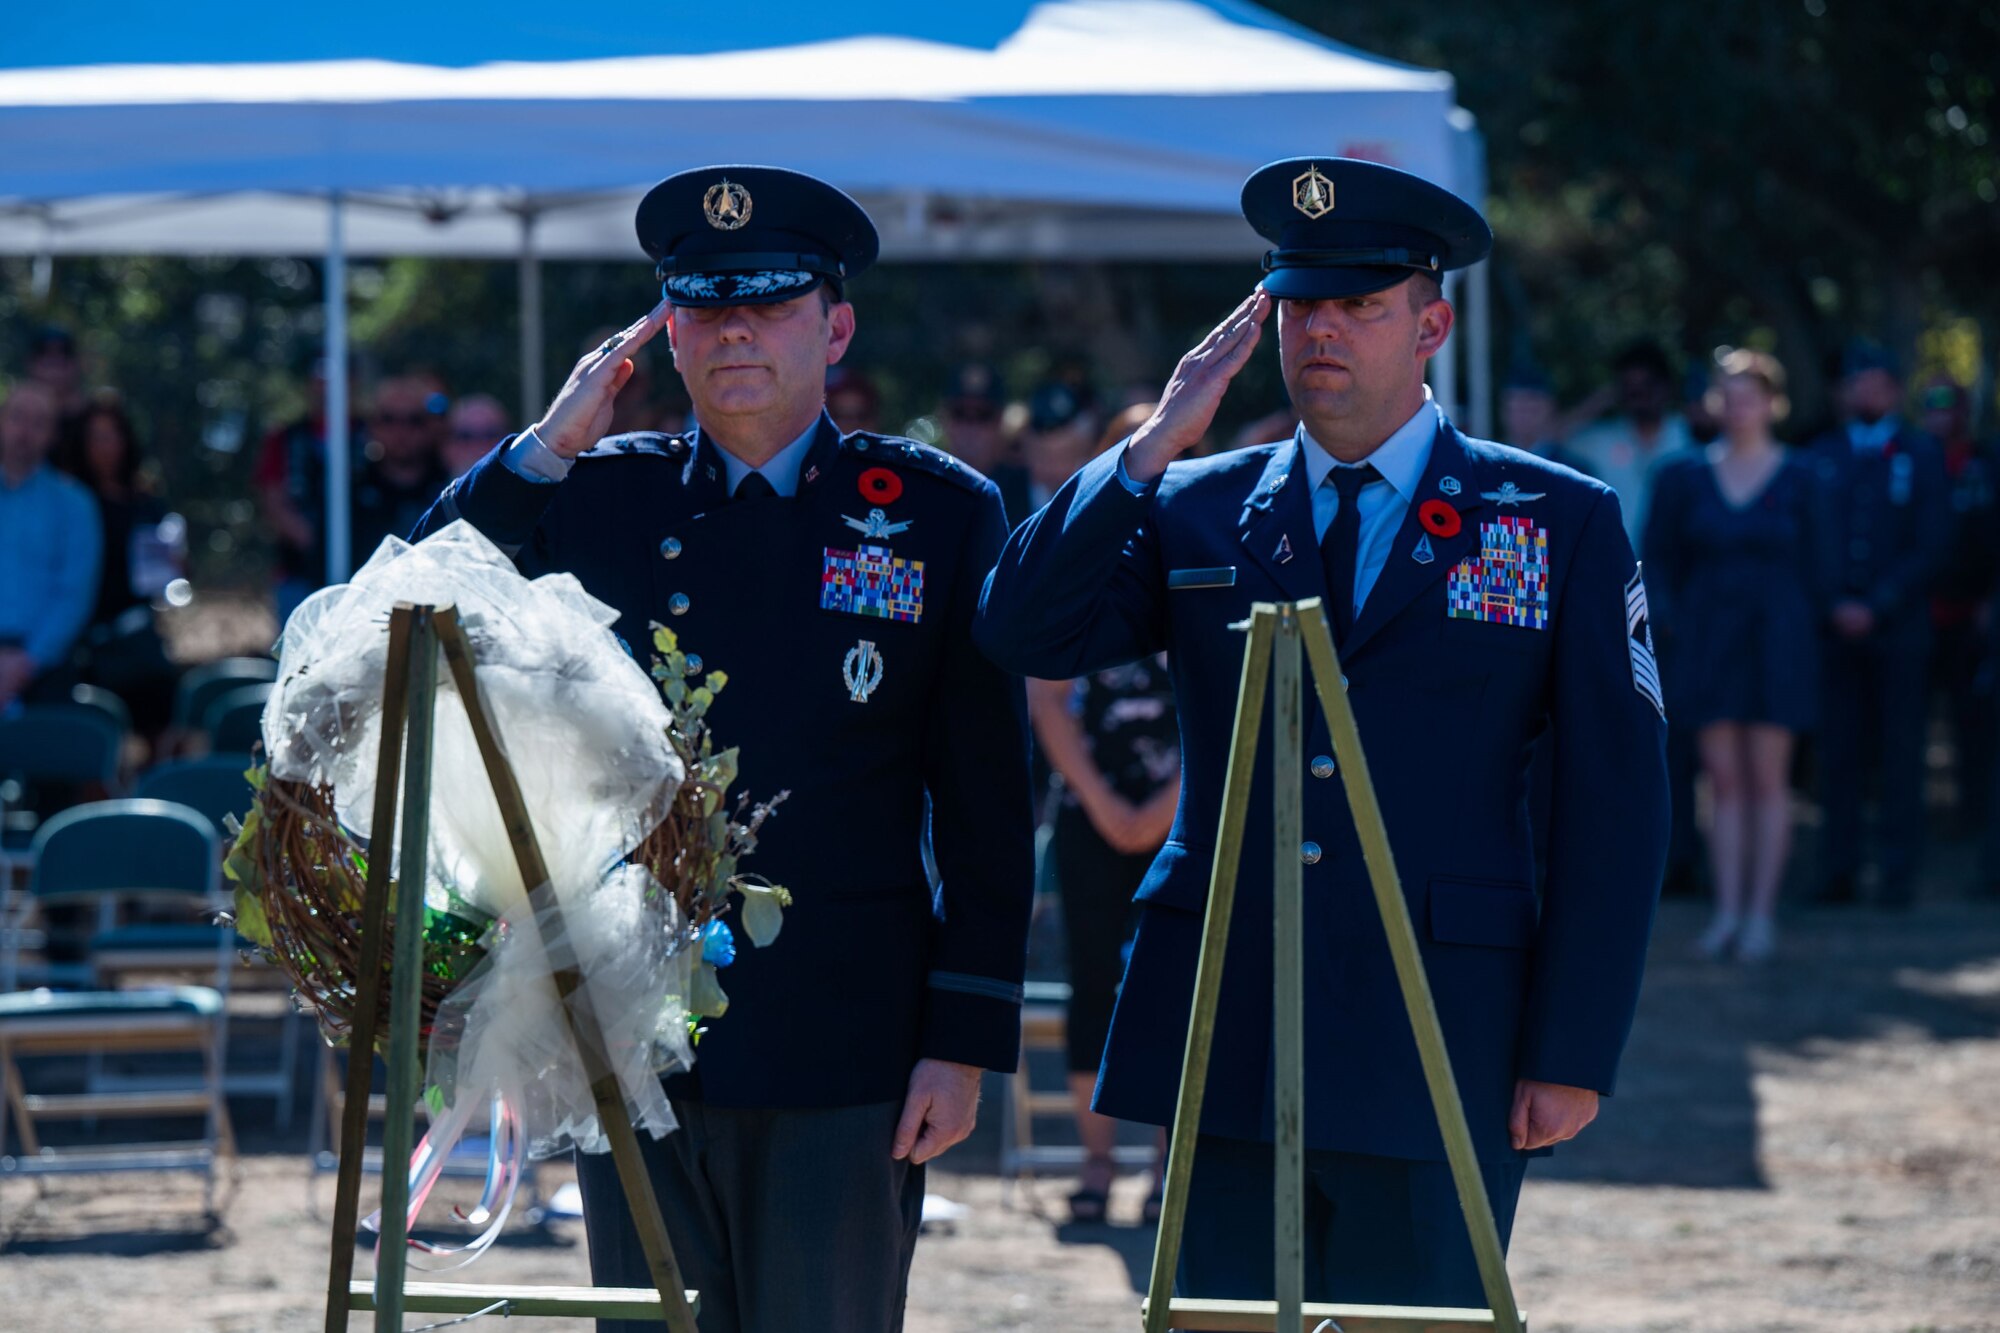 U.S. Space Force Maj. Gen. Douglas A. Schiess, Combined Force Space Component Command commander, left, and U.S. Space Force Chief Master Sgt. Grange S. Coffin, CFSCC senior enlisted leader, salute after laying a wreath during a Remembrance Day ceremony at Pine Grove Cemetery in Orcutt, Calif., Nov. 11, 2023. Combined Force Space Component Command members from the U.S., U.K., Australia, and Canada participated in the ceremony, held by the American Legion Post 534, which was a tribute to those who gave their lives in World War I, and to all the men and women who have served since. (U.S. Space Force photo by Tech. Sgt. Luke Kitterman)